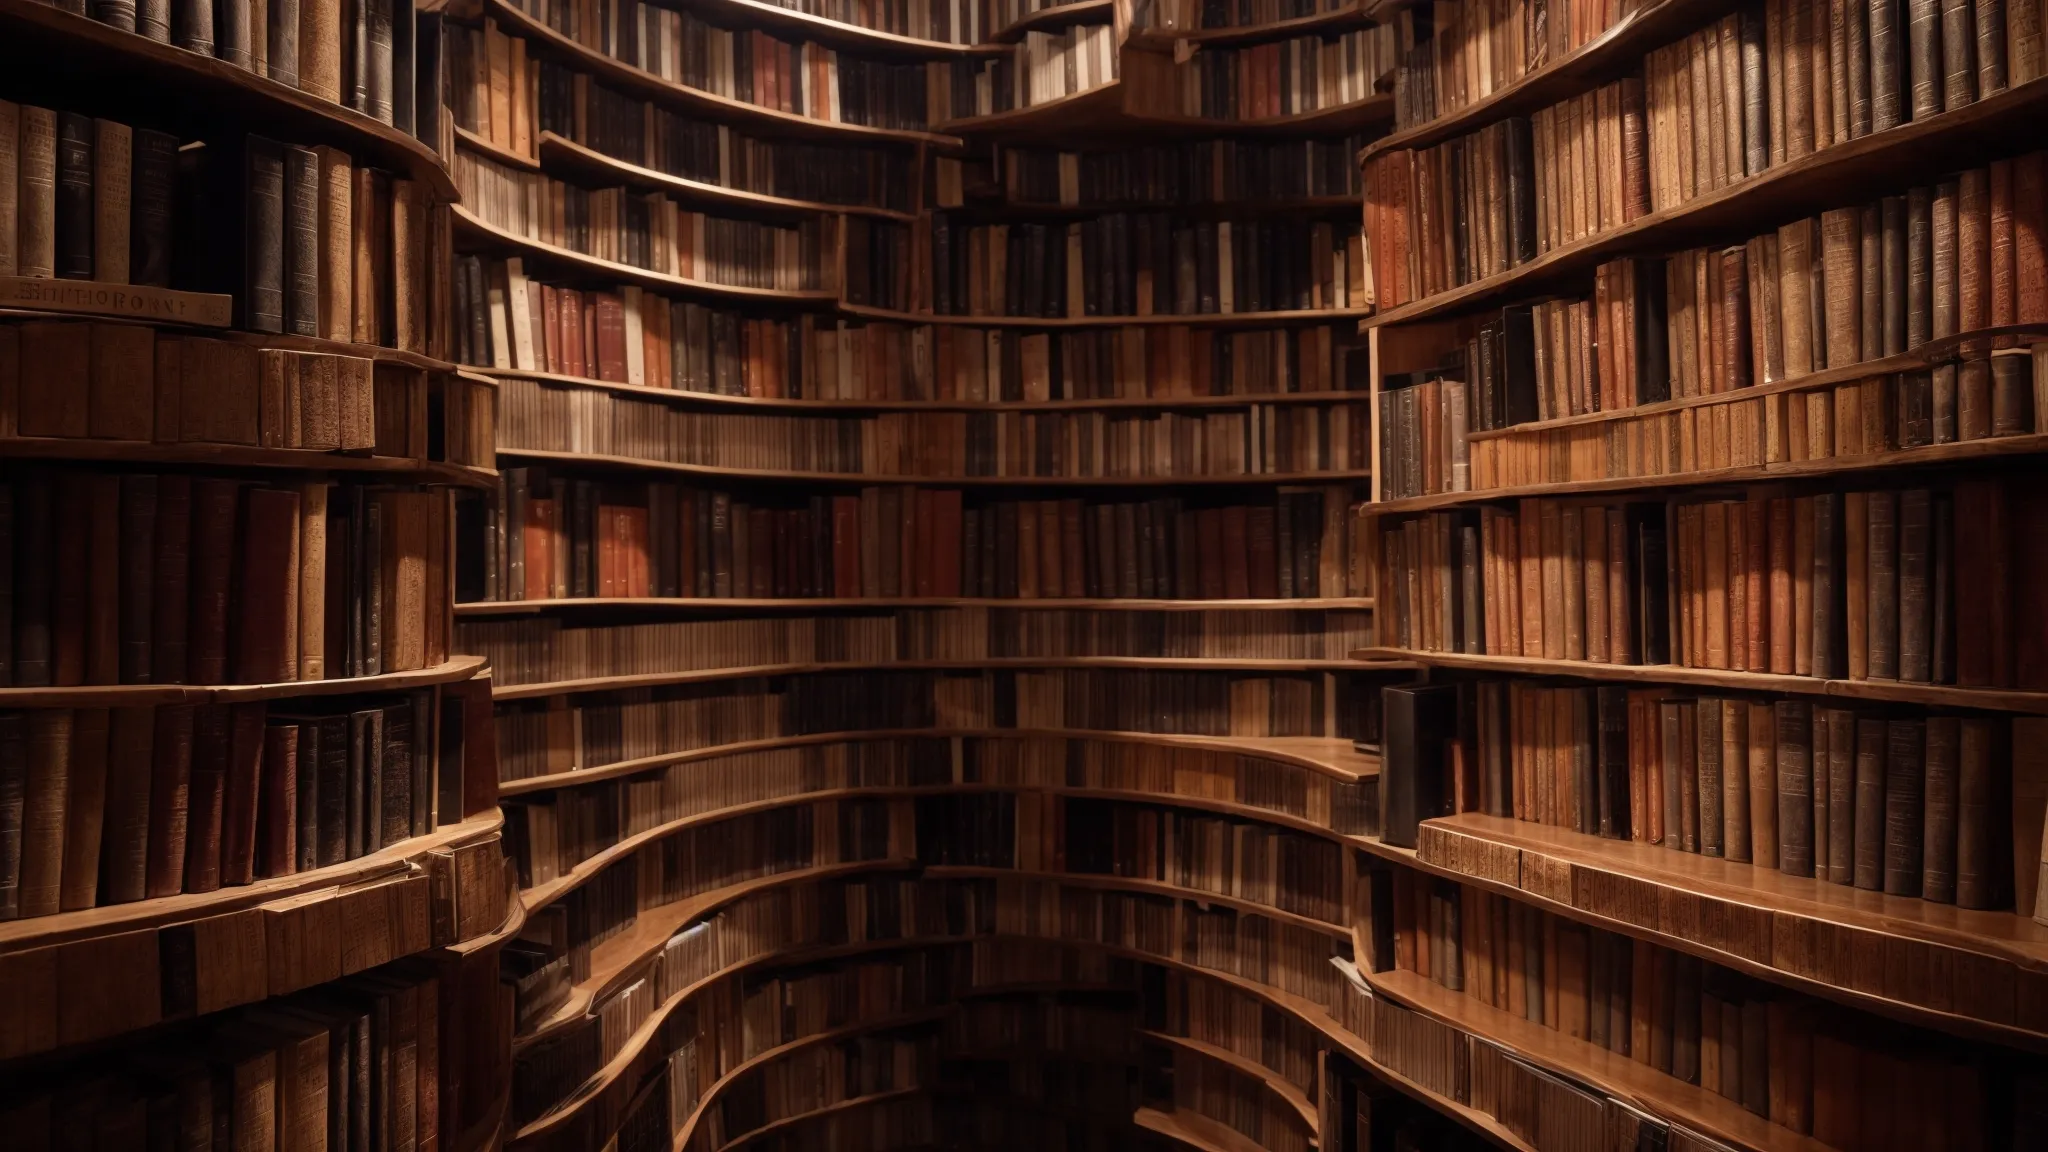 a labyrinth of books towers high, representing knowledge's depth and the challenge of navigating expert content.